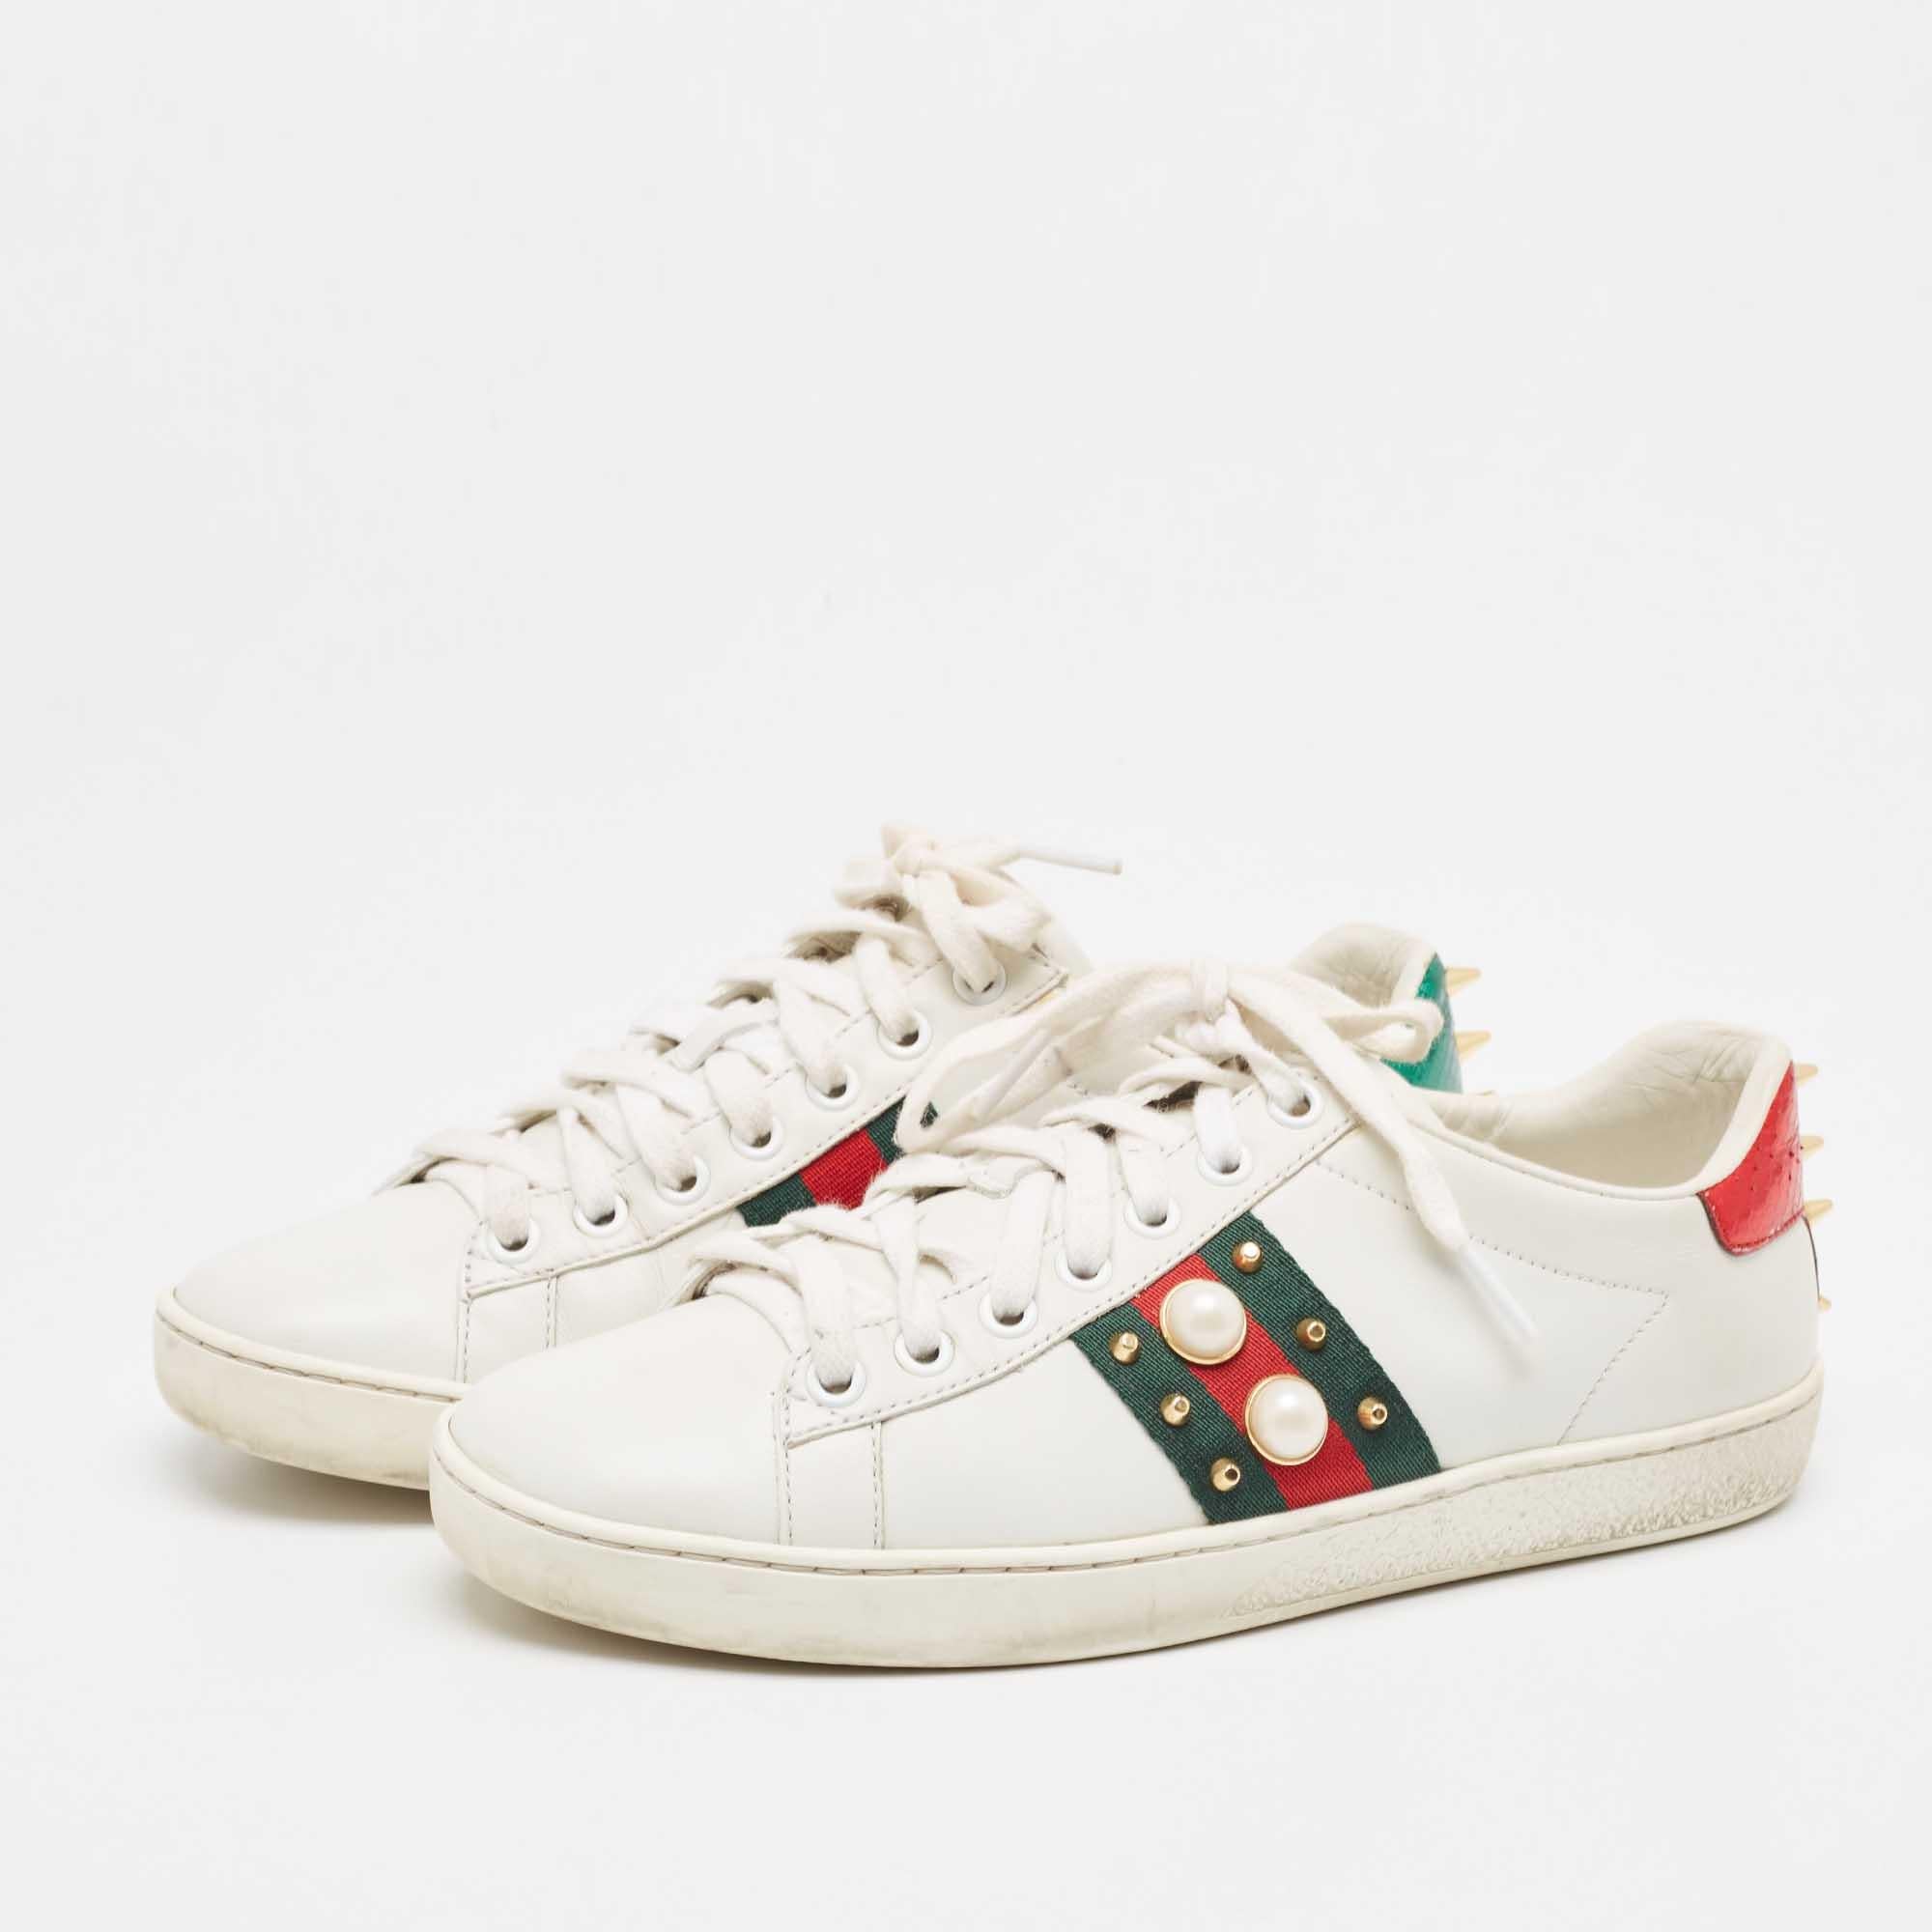 Gucci White Leather Pearl Ace Low Top Sneakers Size 36 In Good Condition For Sale In Dubai, Al Qouz 2